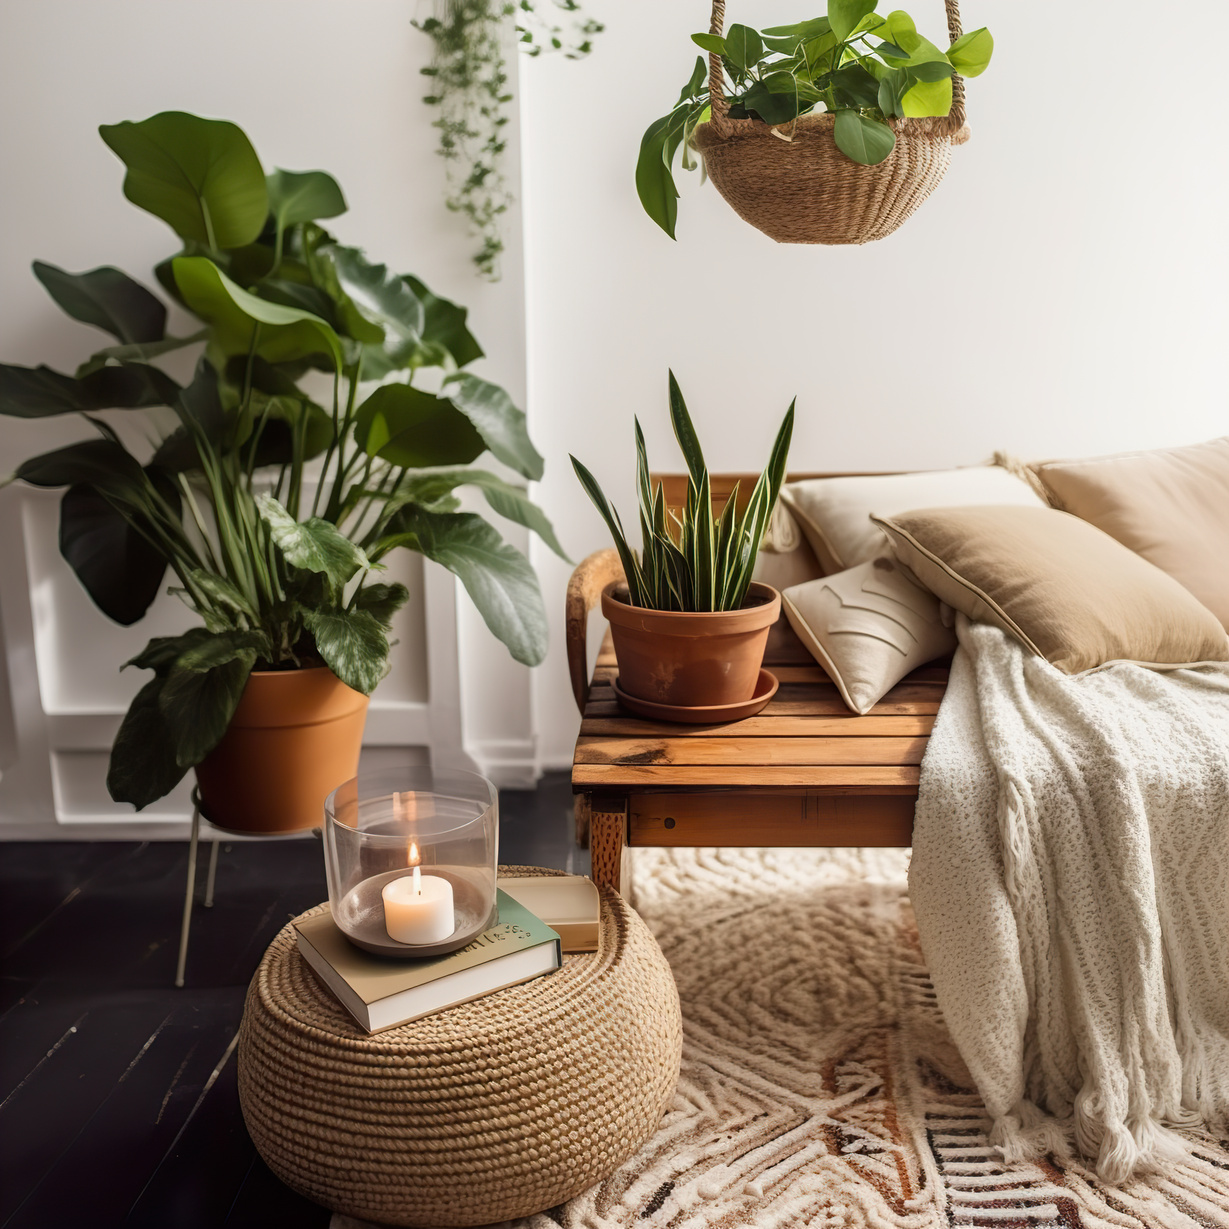 Boho Styled Living Room Interior with Houseplants